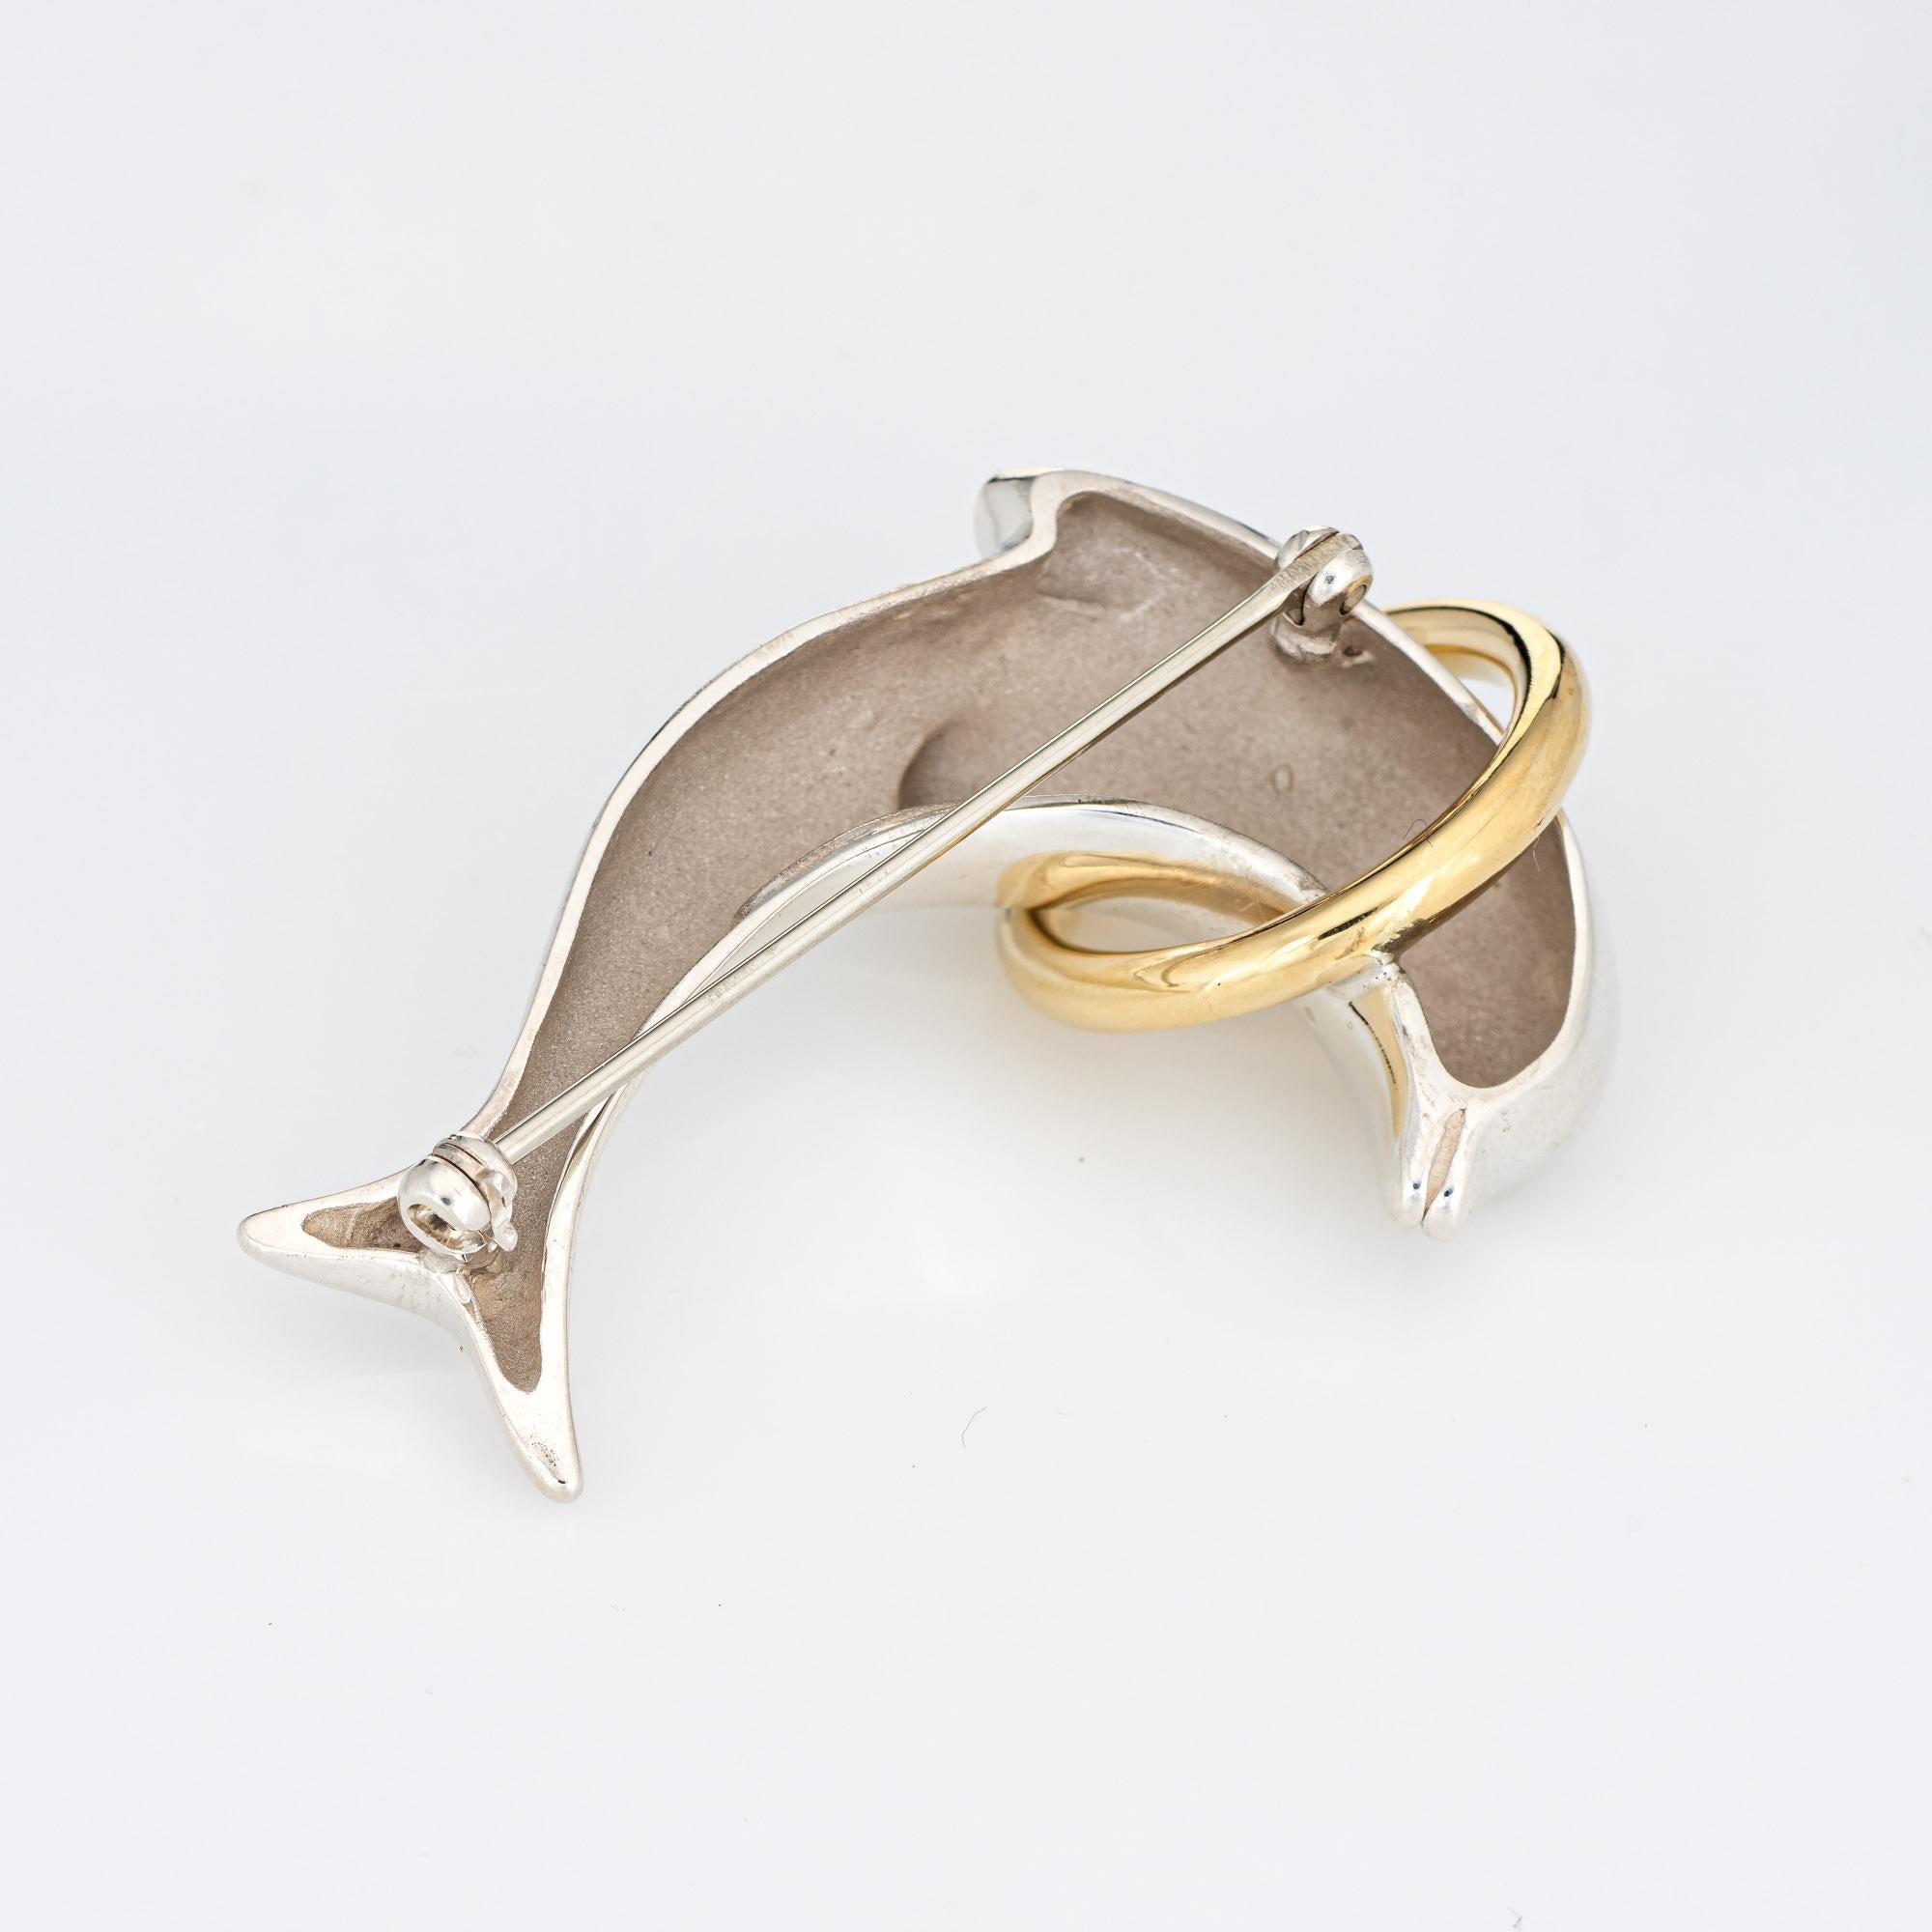 Finely detailed vintage Tiffany & Co dolphin brooch crafted in sterling silver & 18k yellow gold (circa 1990s). 

The sweet brooch depicts a dolphin in full flight, jumping through an 18k yellow gold hoop. 

The brooch is in very good condition and